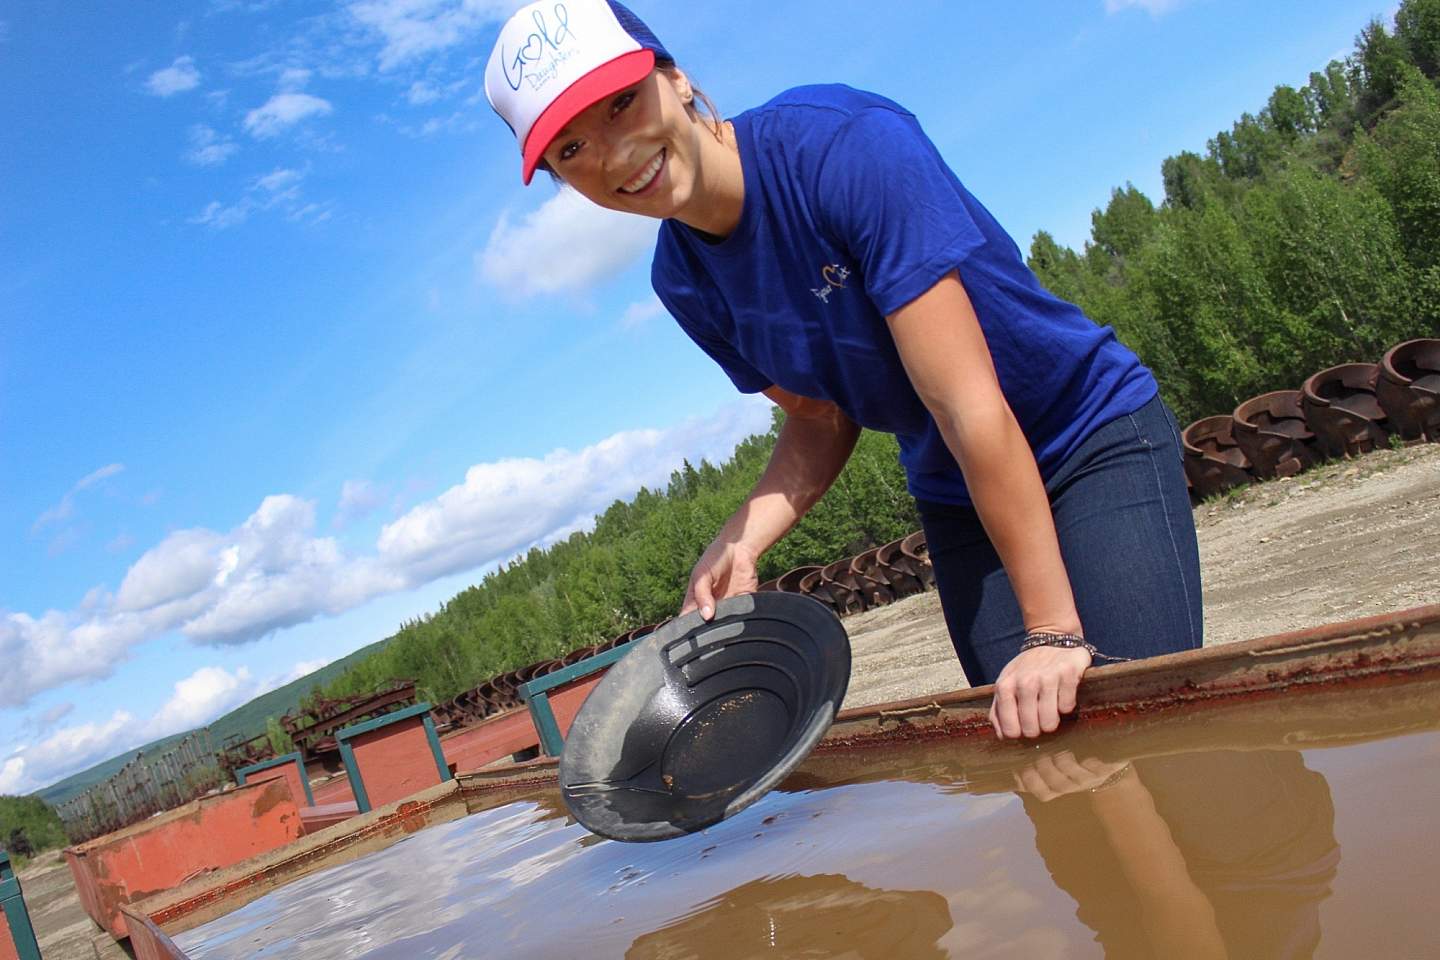 A smiling woman pans for gold outside.